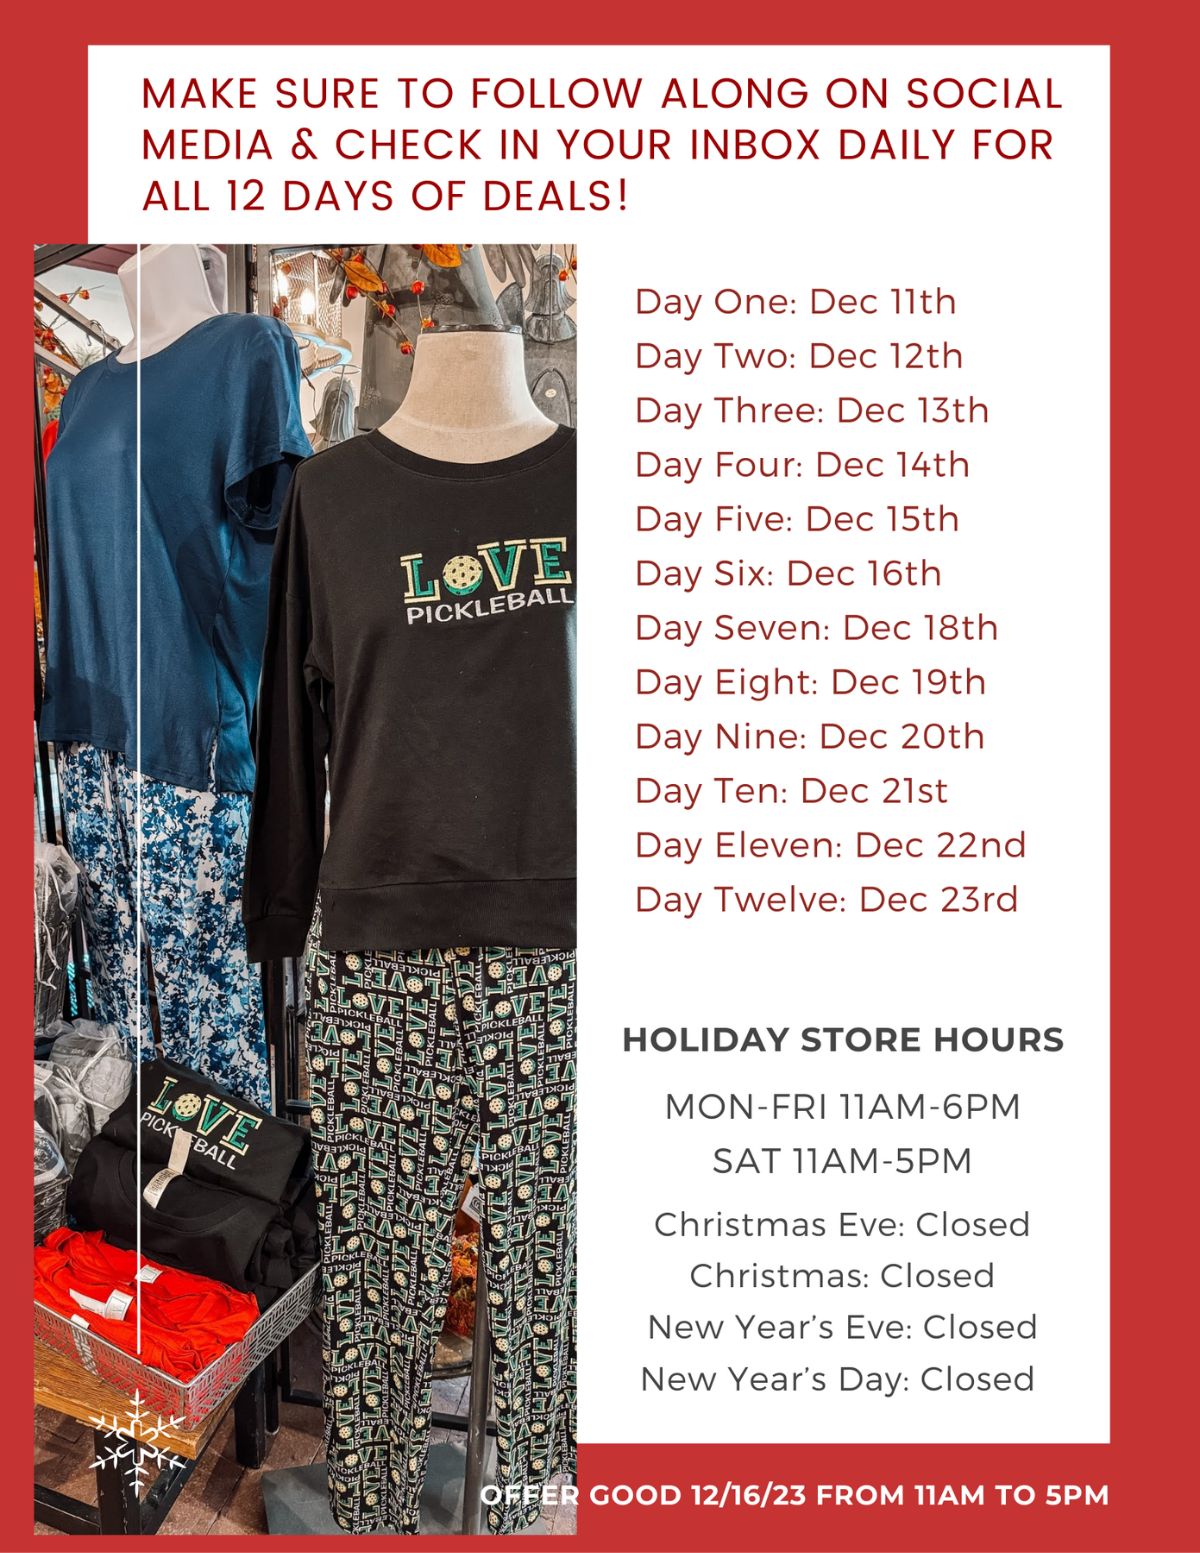 Buy 1 get 1 60% off on pajamas at Willow